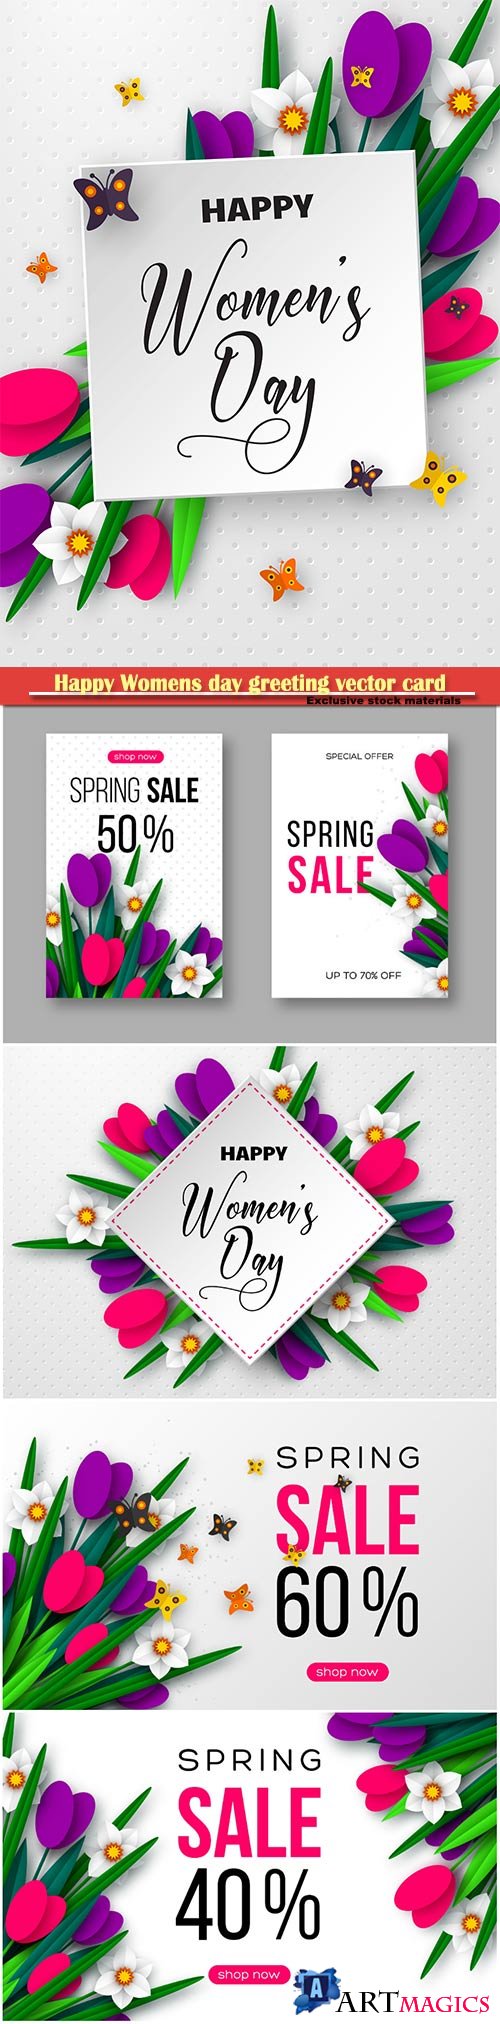 Happy Womens day floral greeting vector card design # 3